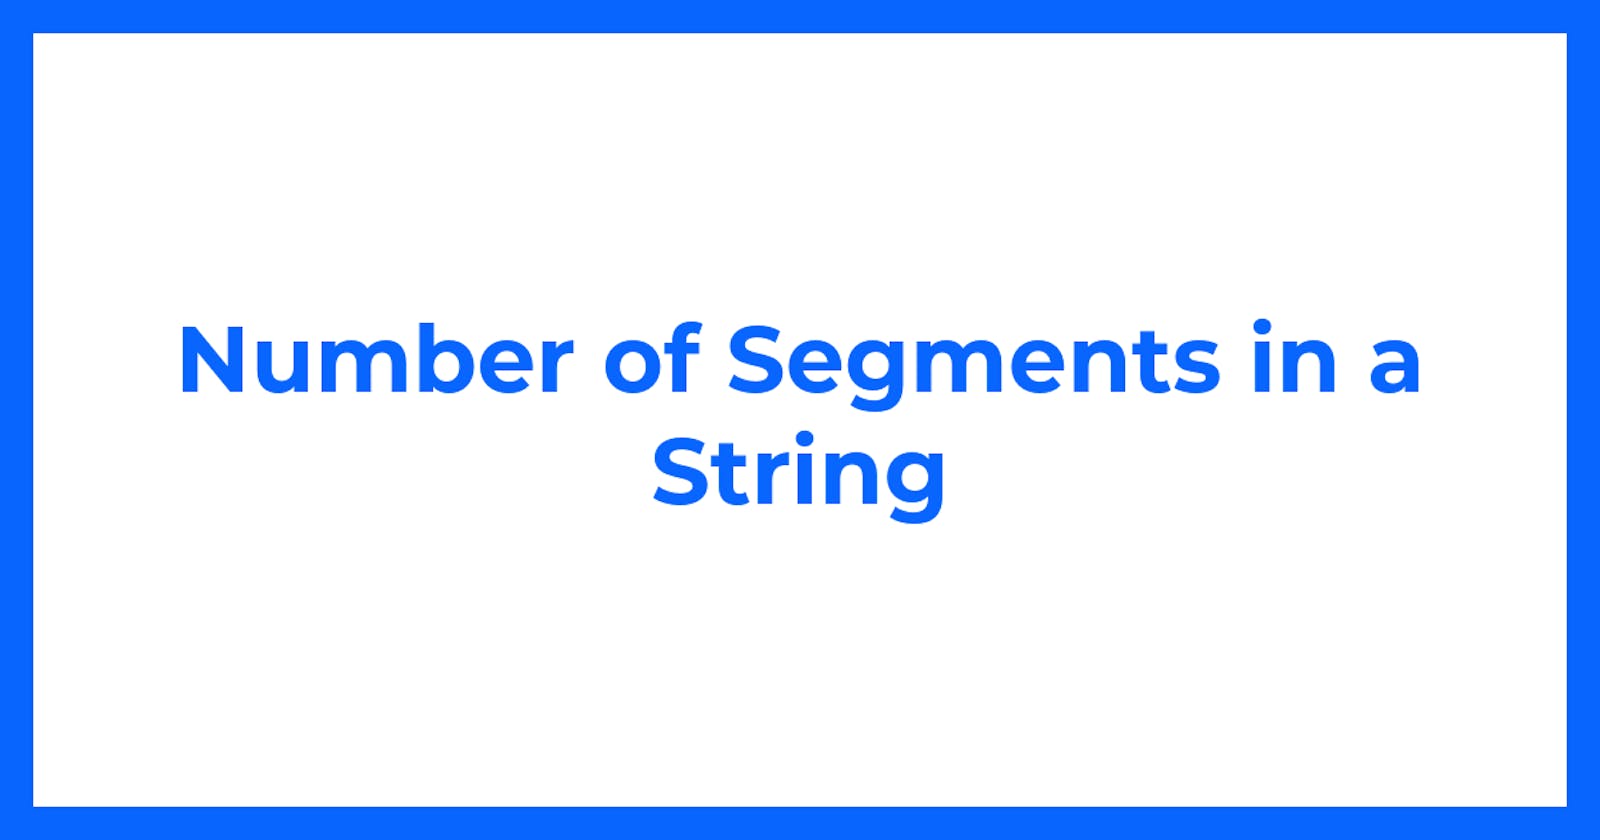 Number of Segments in a String